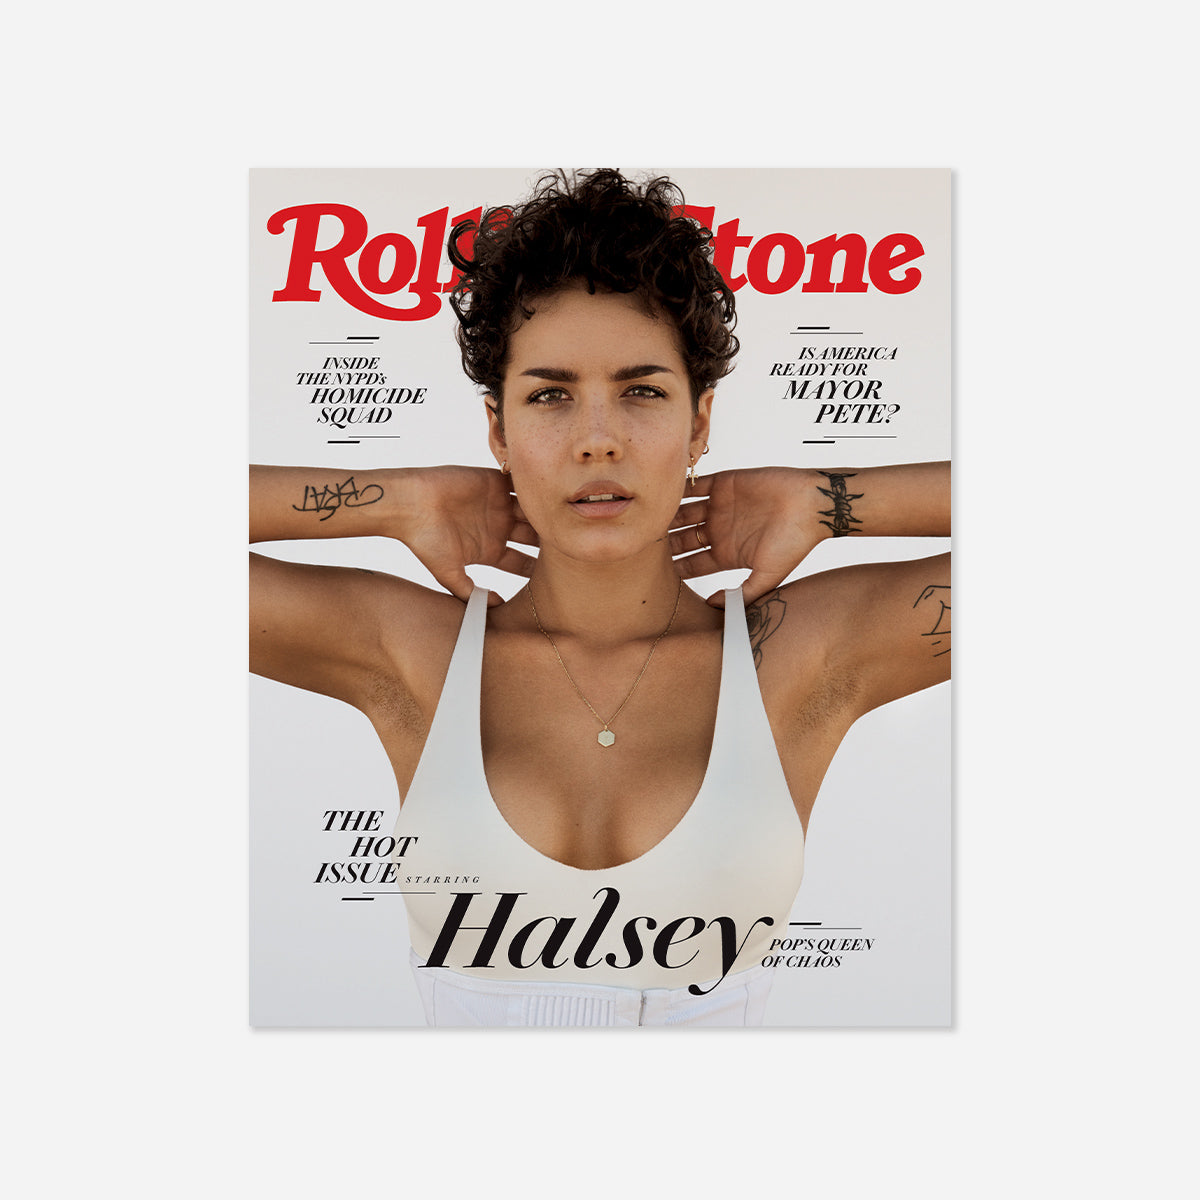 Rolling Stone Magazine July 2019 Featuring Halsey (Issue 1329)